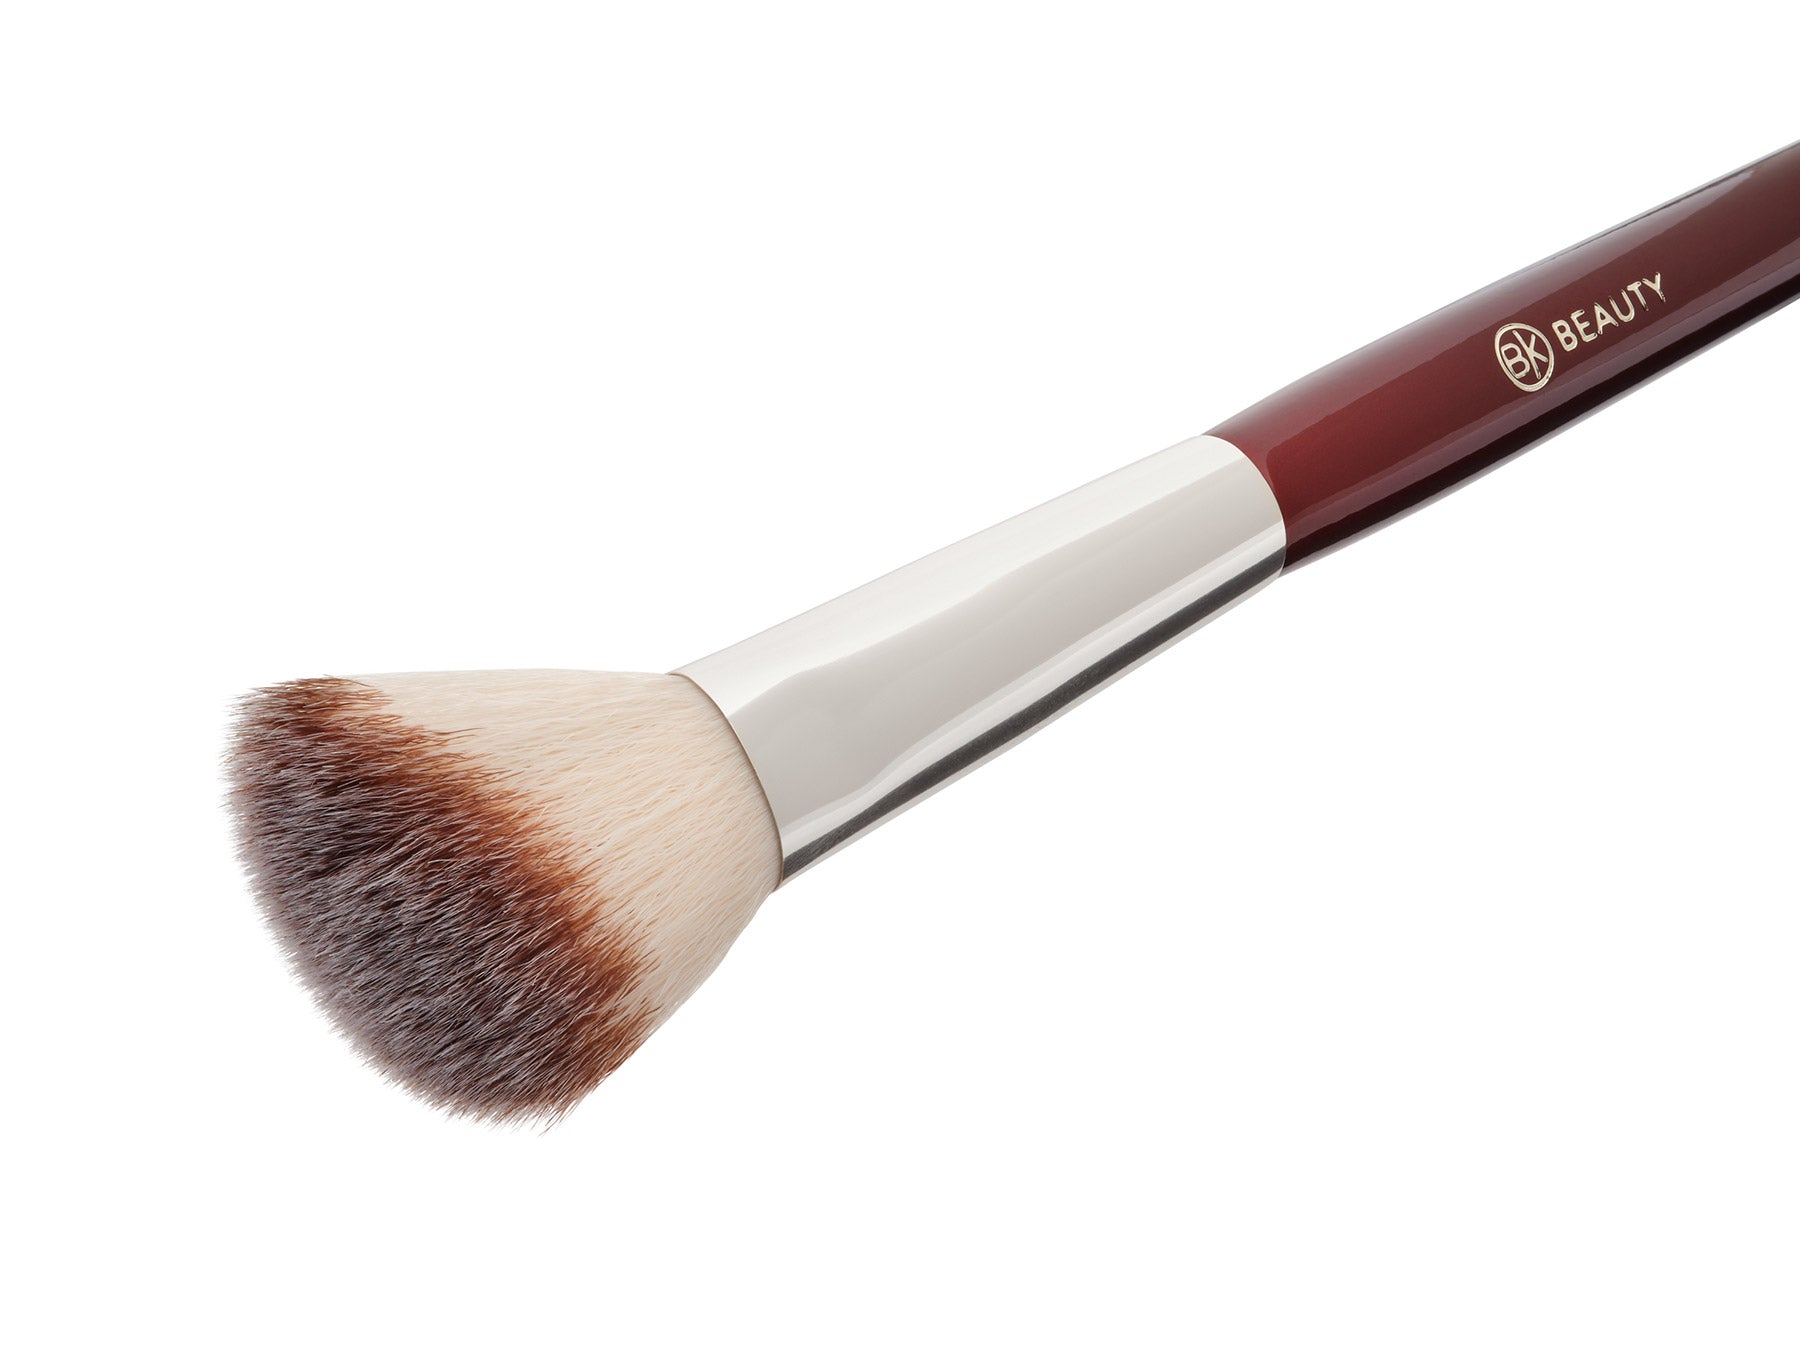 Angled blush brush - contour and shape your face